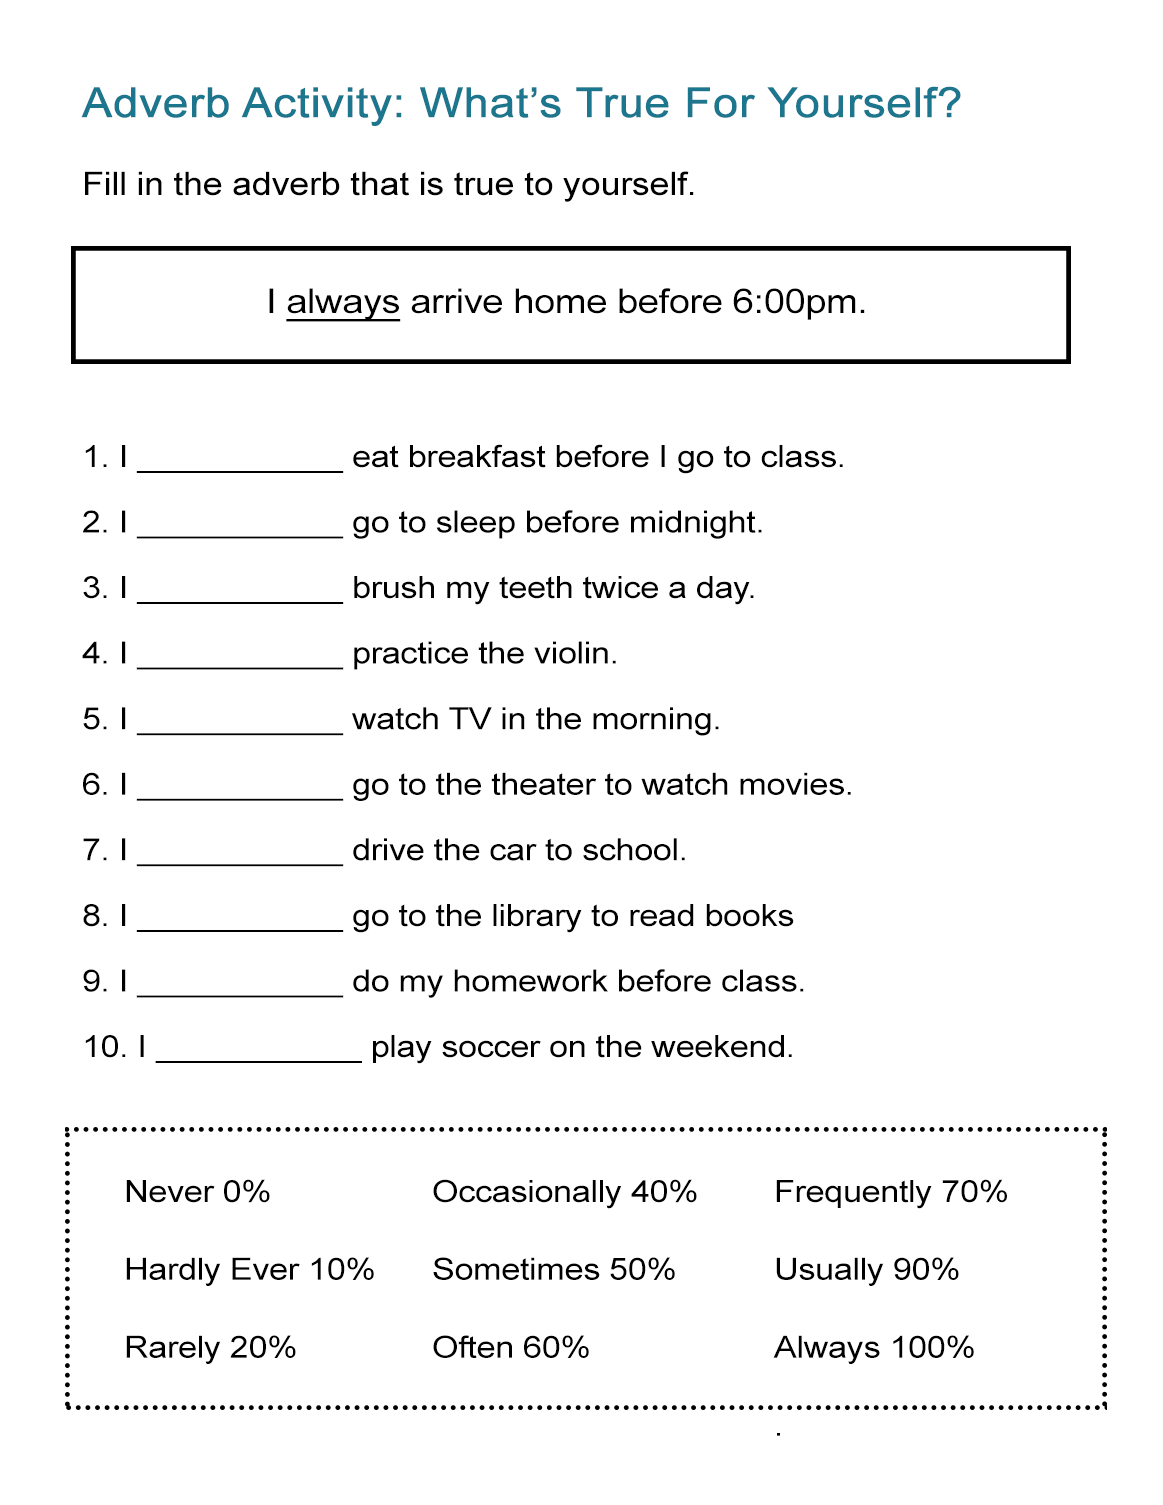 Adverb Activity What's True For Yourself  All Esl As Well As Adverb Practice Worksheets